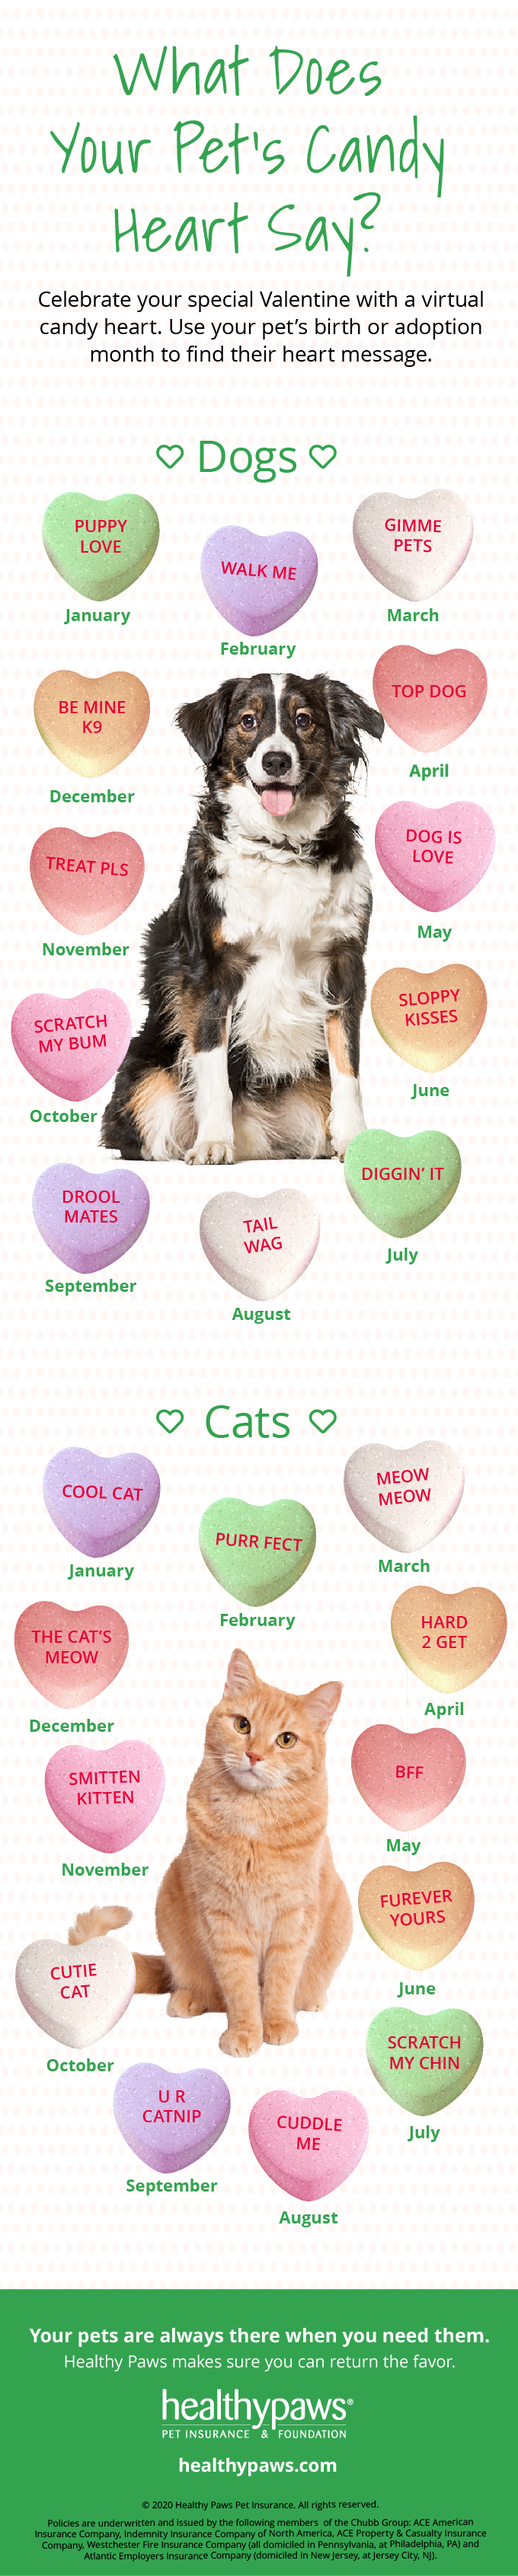 What Does Your Pet's Candy Heart Say?